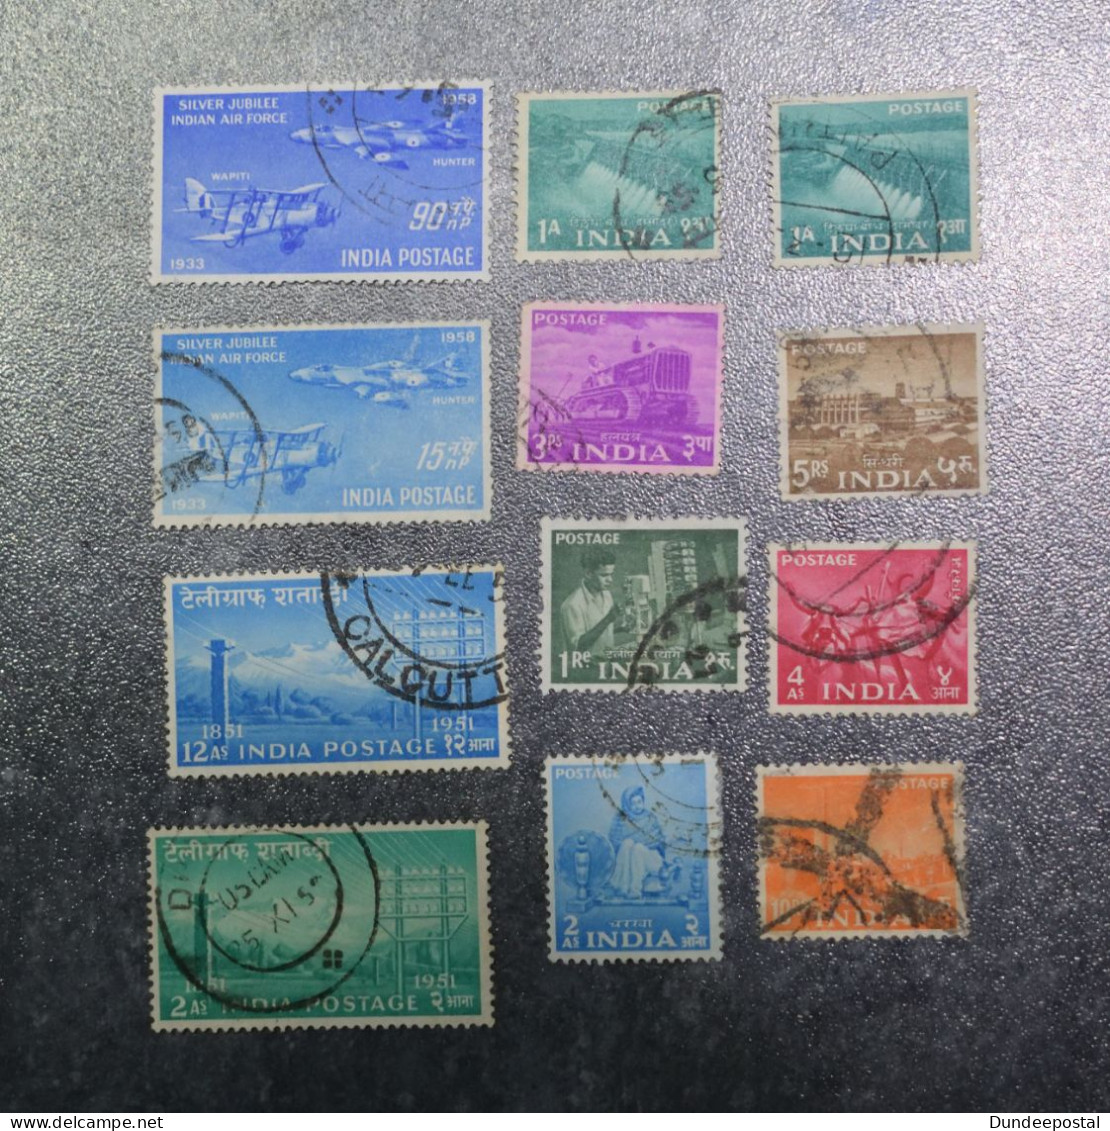 INDIA  STAMPS  Coms 1955 - 60  (N19)    ~~L@@K~~ - Used Stamps